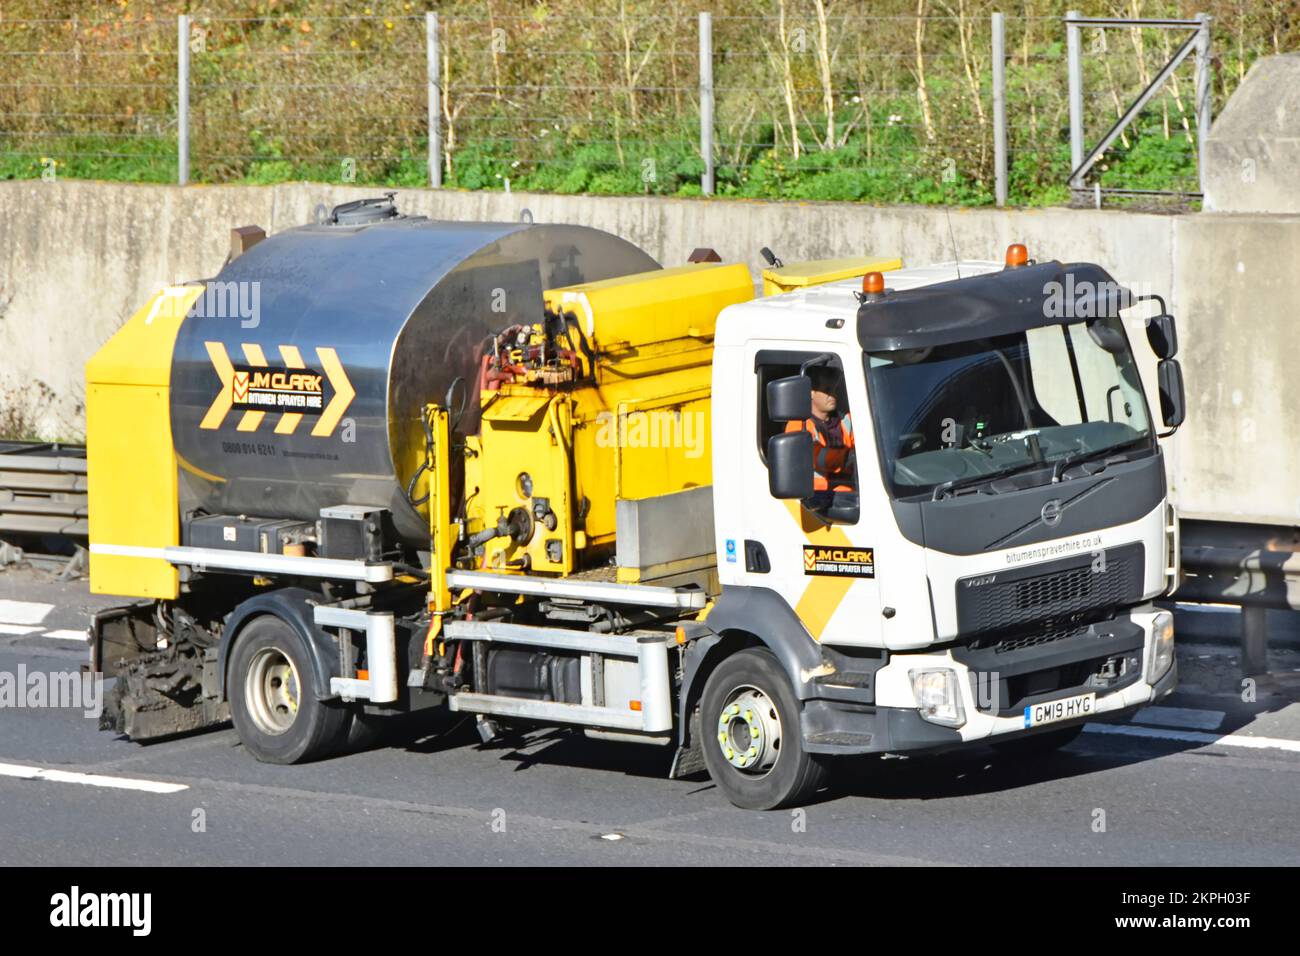 Volvo lorry truck chassis cab & specialized bitumen tank equipment used for road spraying commercial vehicle driver in cab driving on UK motorway road Stock Photo